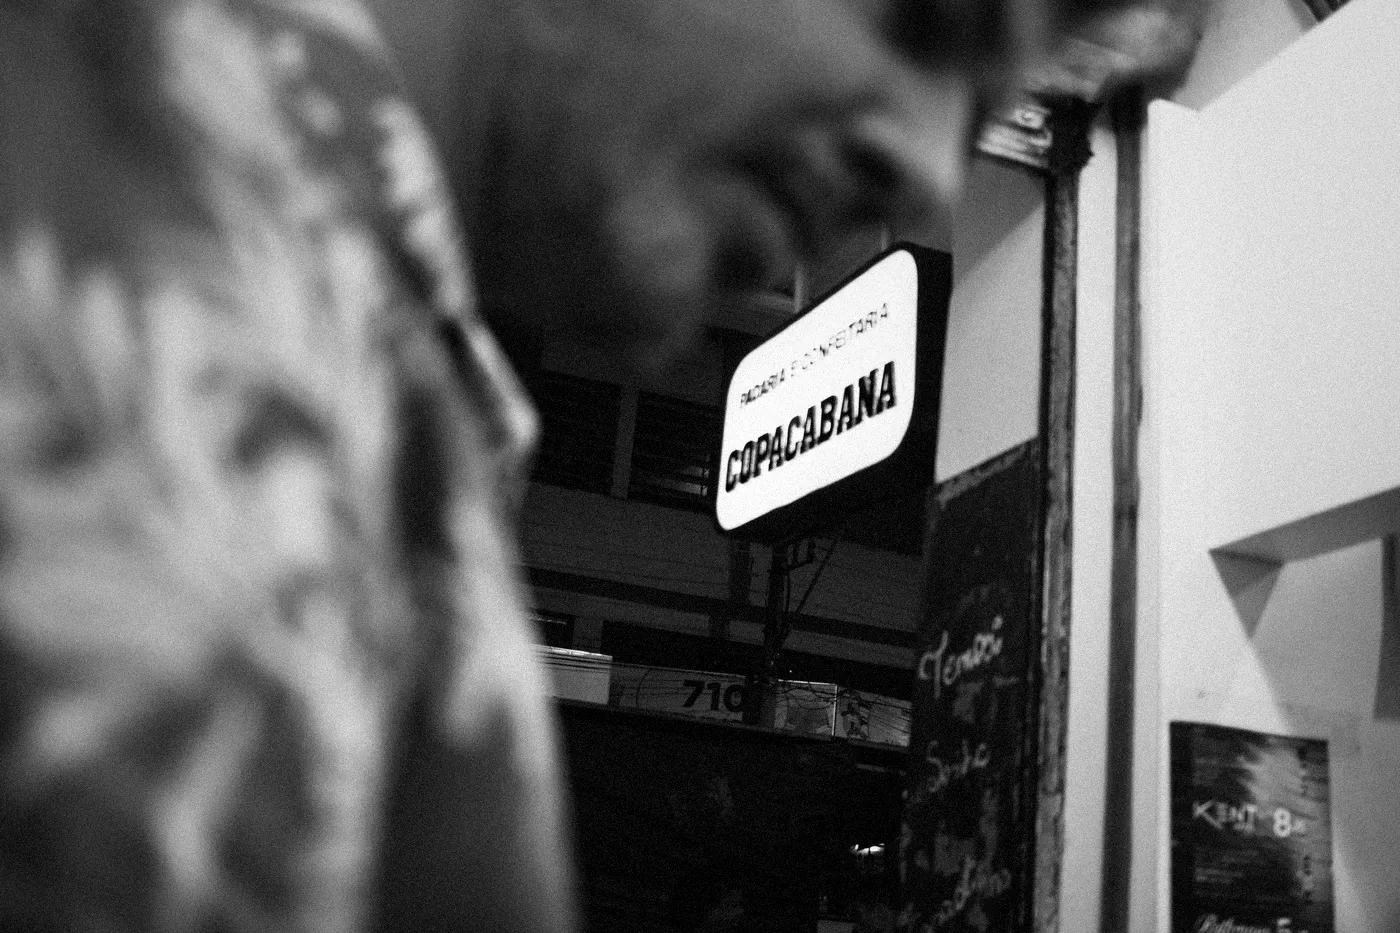 A blurred man on front. A Sign of a bakery with COPACABANA writen on it. Shot in black and white